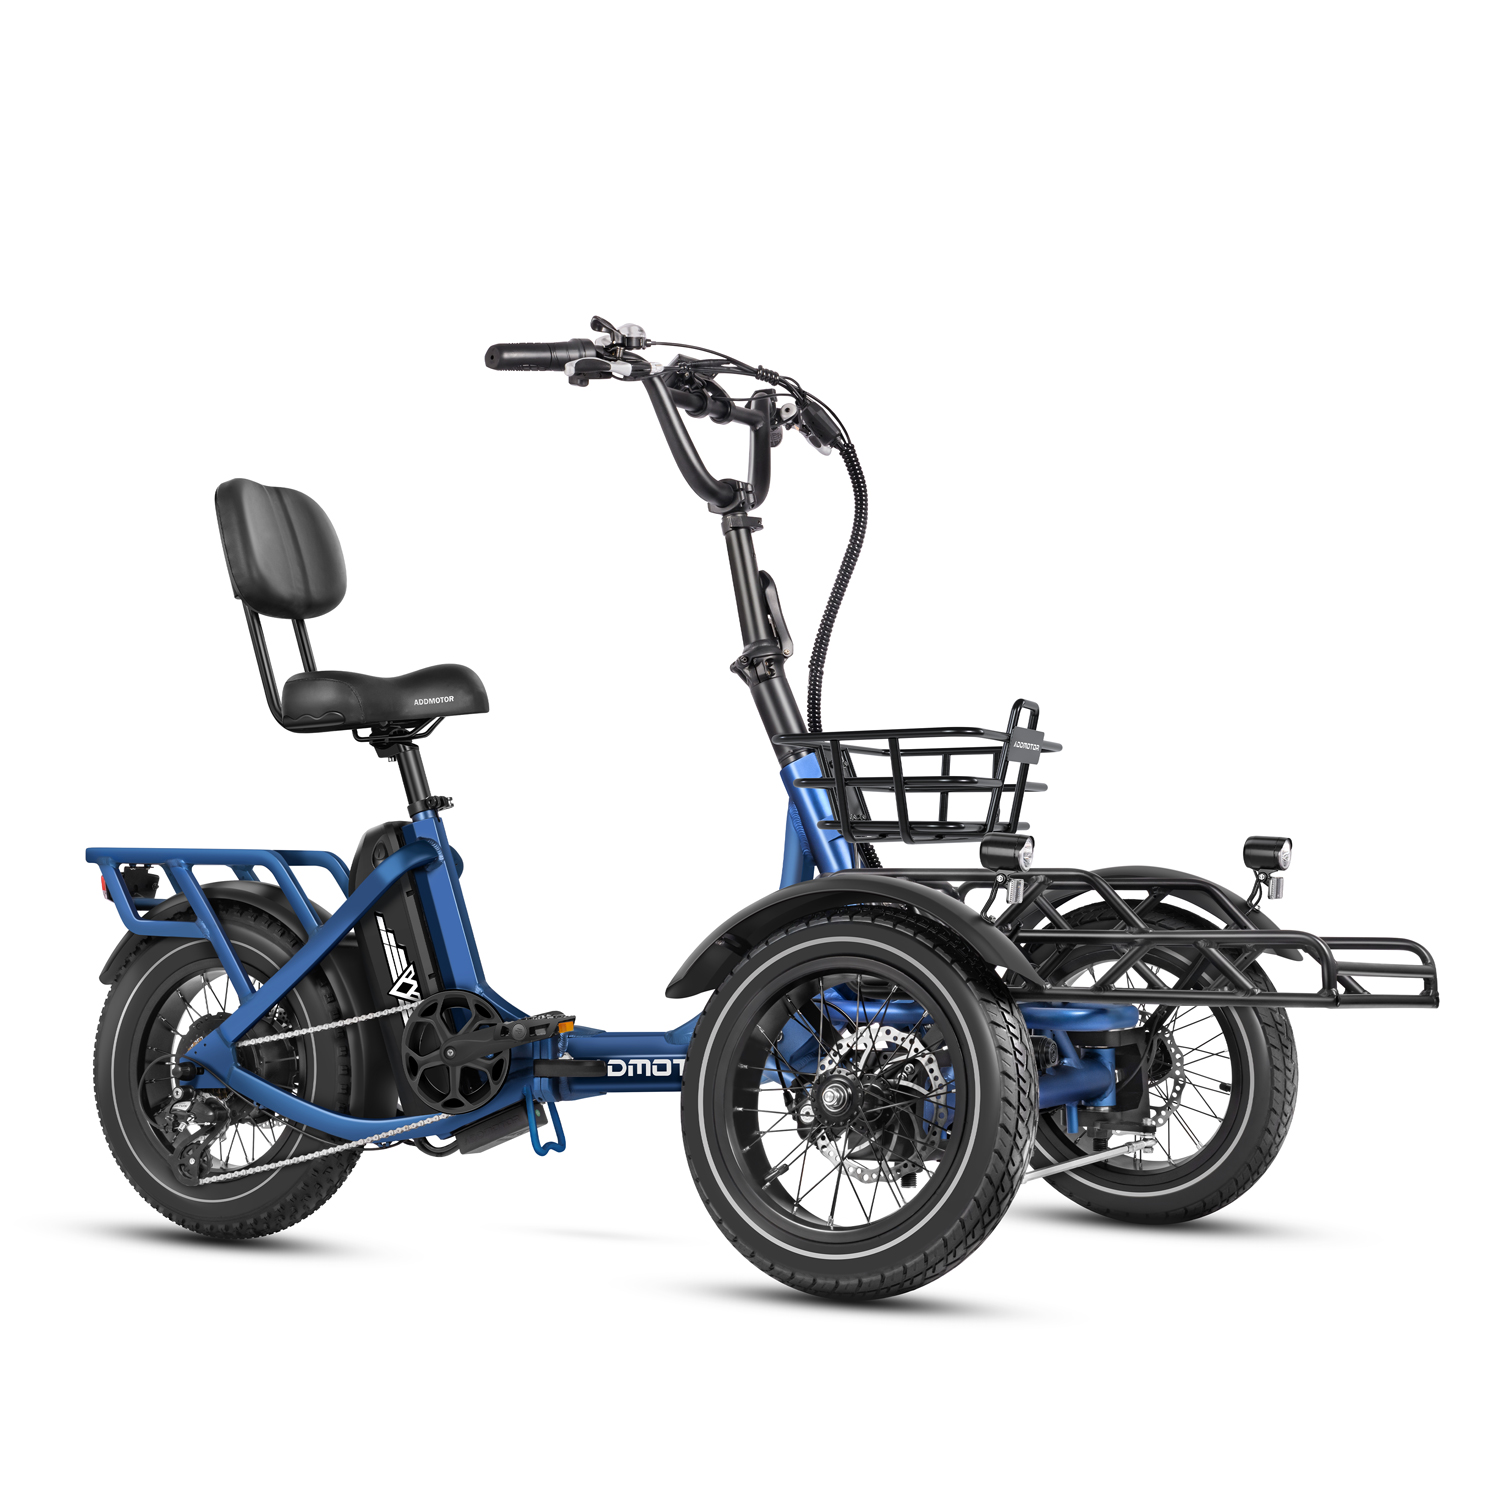 Addmotor - SPYTAN electric cargo trike with large rear basket and blue frame, displayed from the side on a white background, features mid-axis torque sensing.